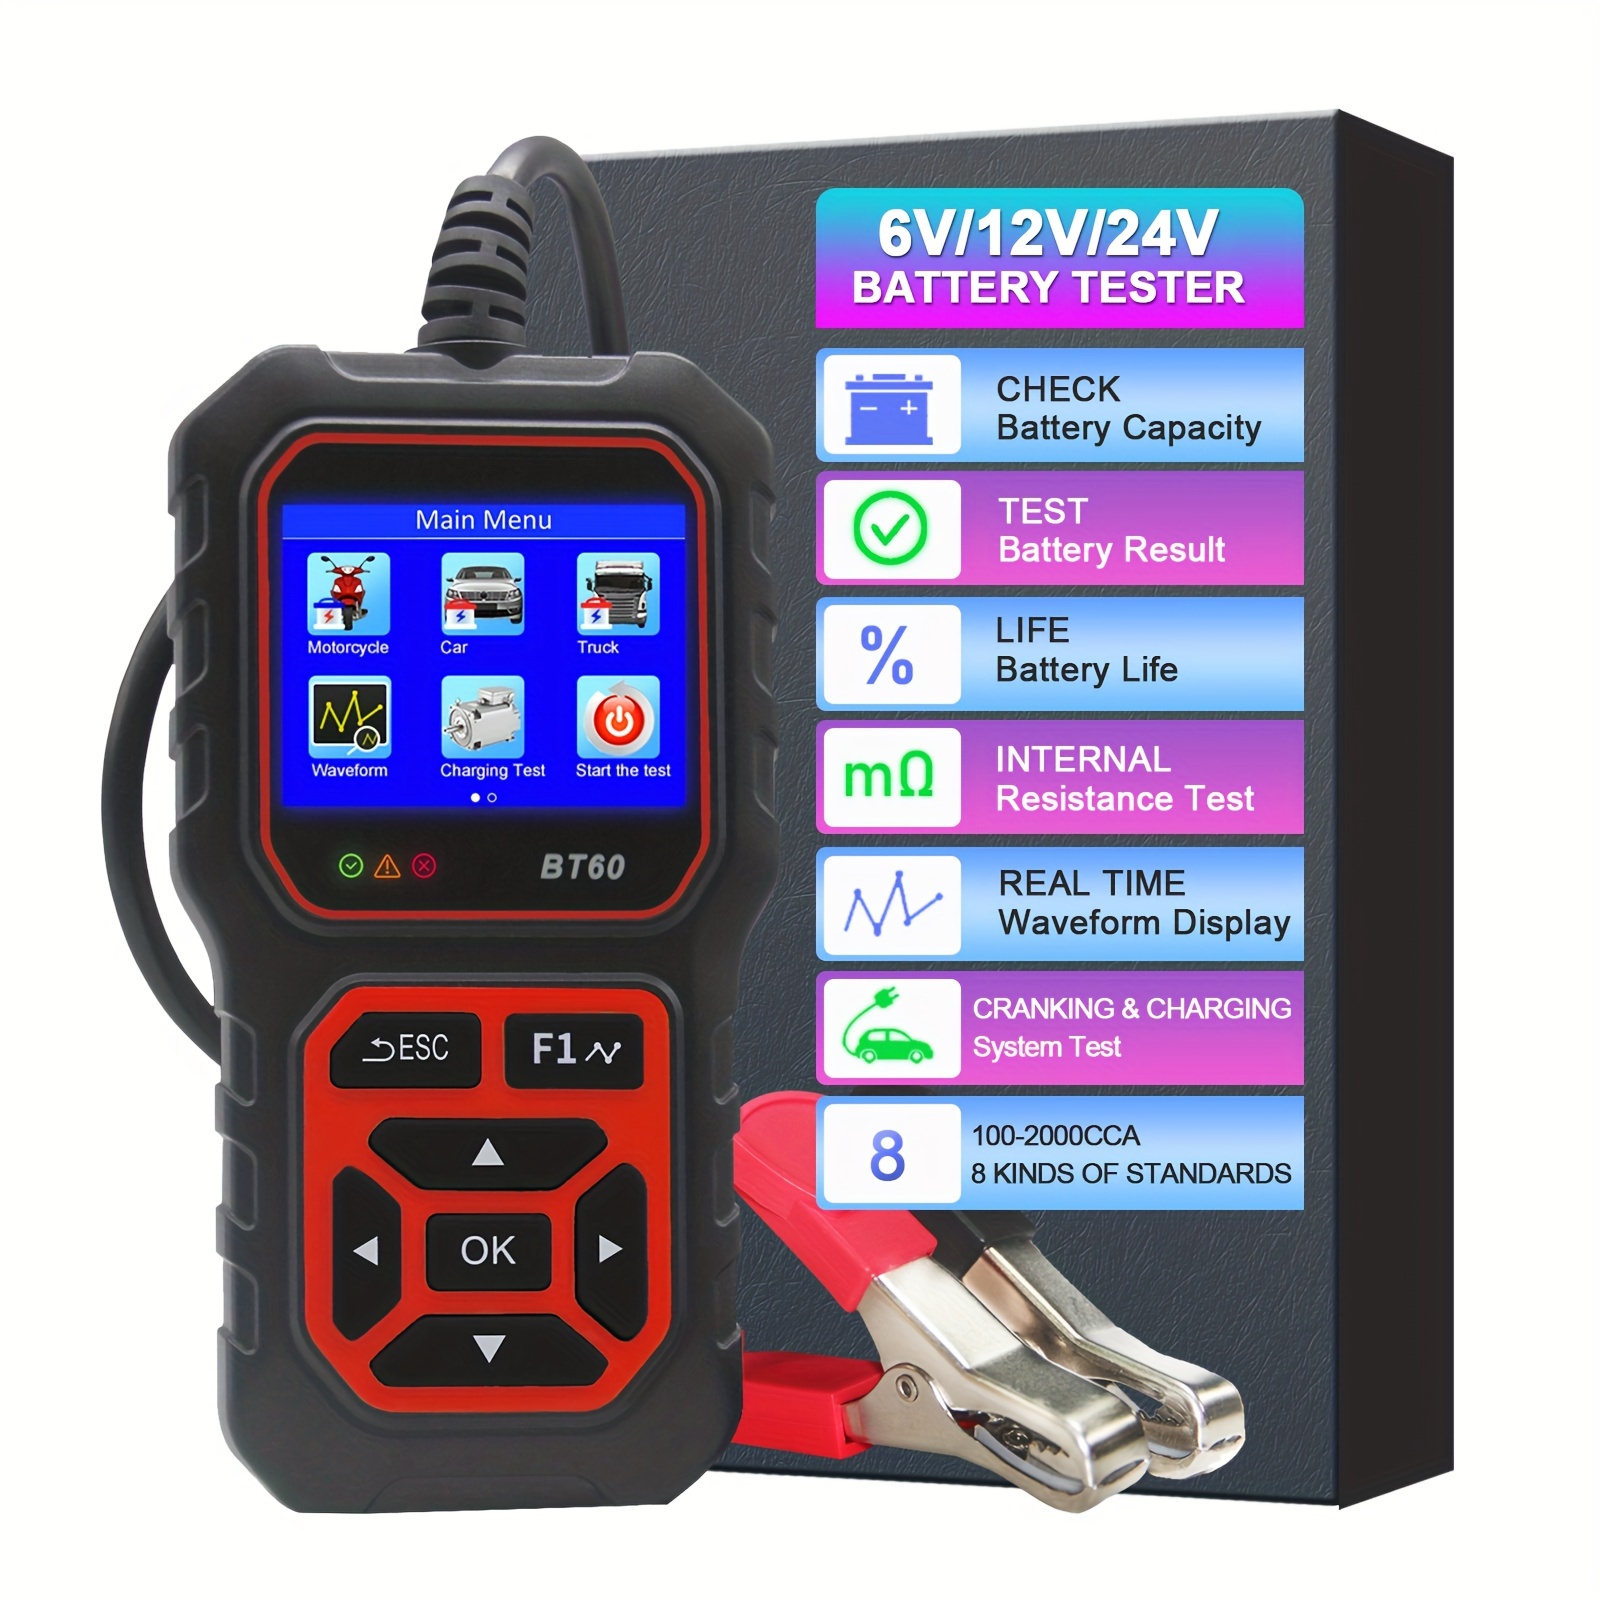  KAIWEETS Car Battery Tester 12V 24V, Auto Battery Load Tester  with 100-2000 CCA Value Internal Resistance Cranking Charging Test, Battery  Analyzer for Automotive, Motorcycle, Truck, Boat : Automotive